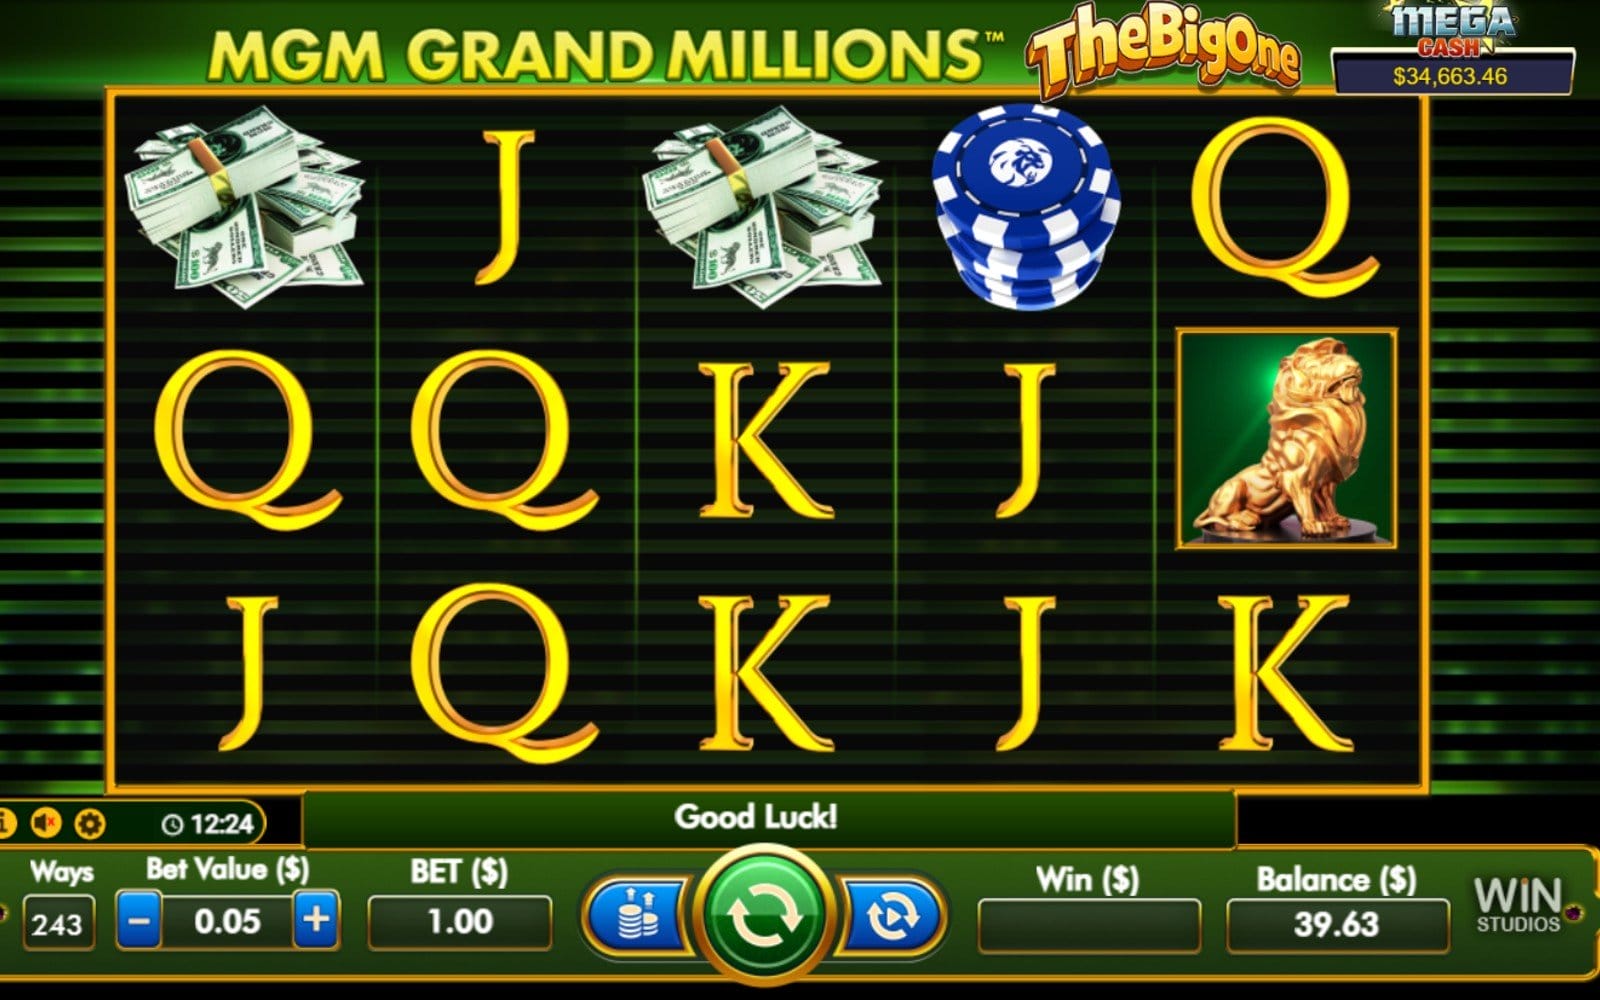 download the new Play MGM Casino